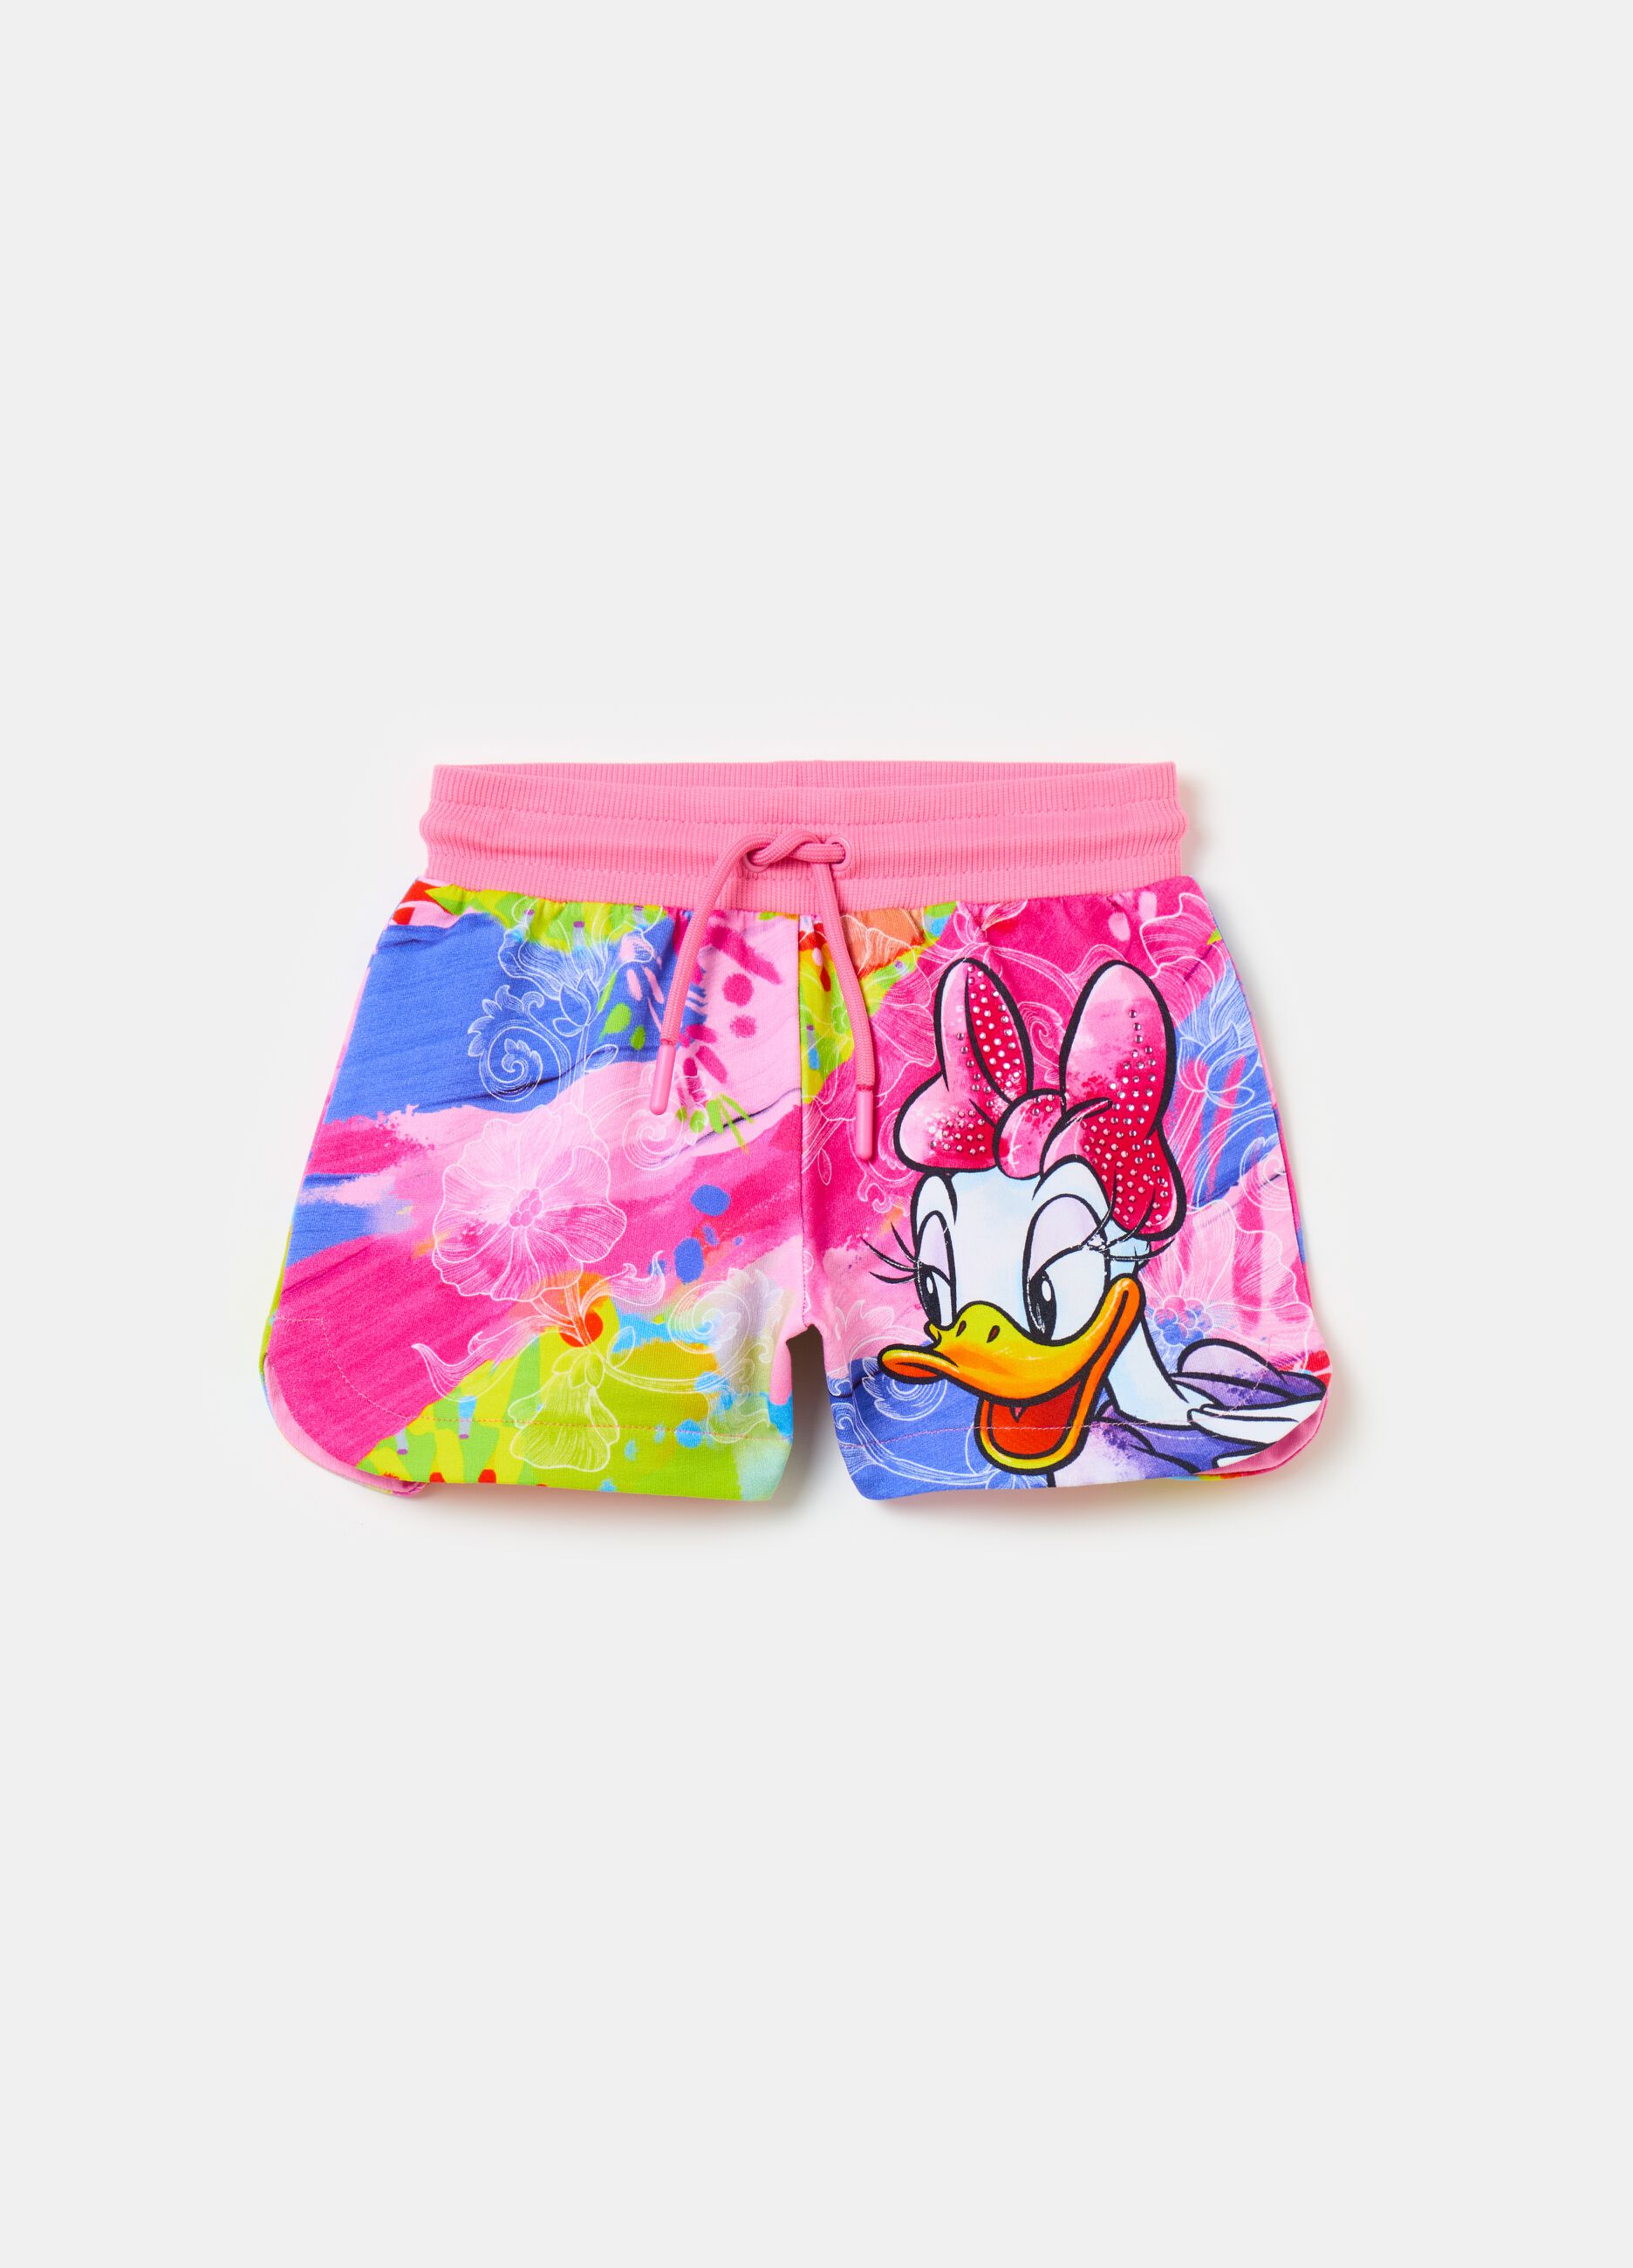 Shorts with drawstring and Donald Duck 90 print